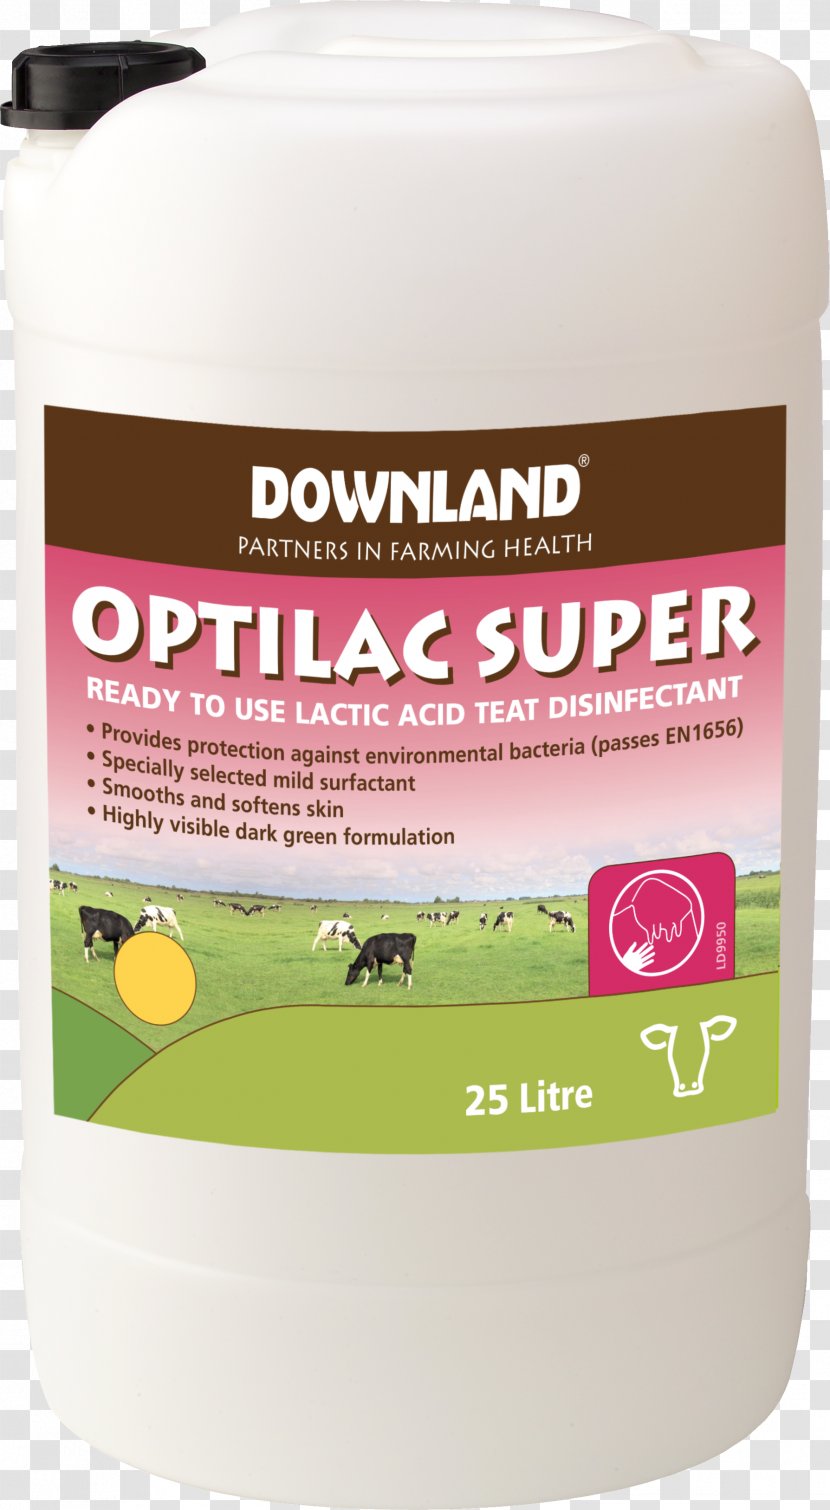 Agriculture OptiLAC Product Liquid Copper(II) Sulfate - Disinfectants - Grazing Goats Transparent PNG